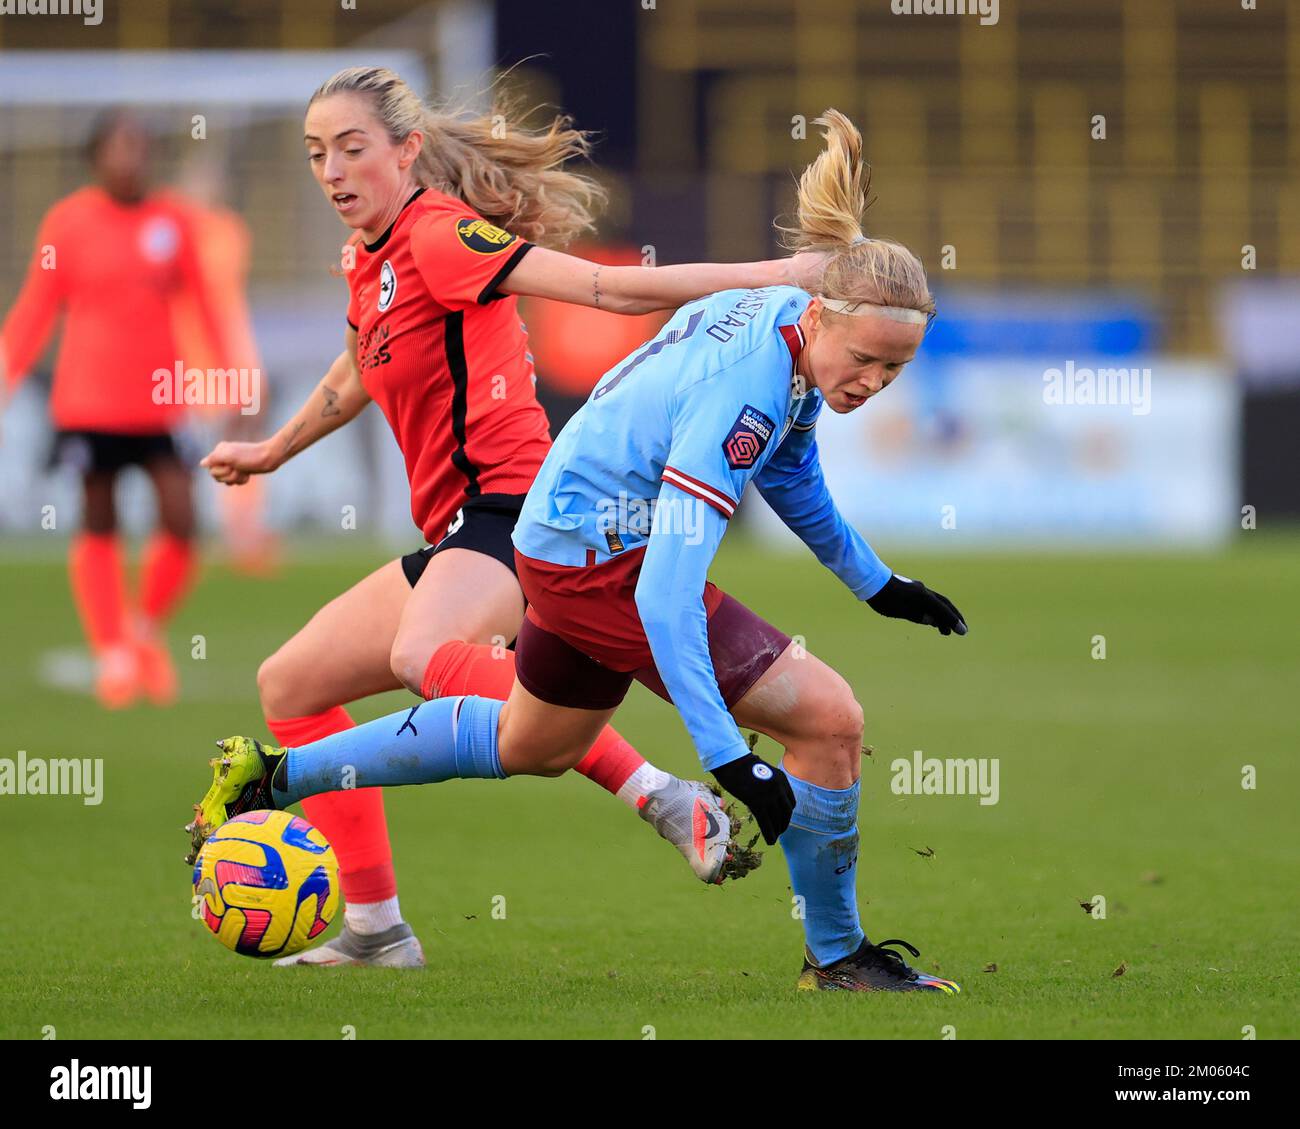 Megan Connolly #8 of Brighton tackles Julie Blakstad #41 of Manchester City during The FA Women's Super League match Manchester City Women vs Brighton & Hove Albion W.F.C. at Etihad Campus, Manchester, United Kingdom, 4th December 2022  (Photo by Conor Molloy/News Images) Stock Photo